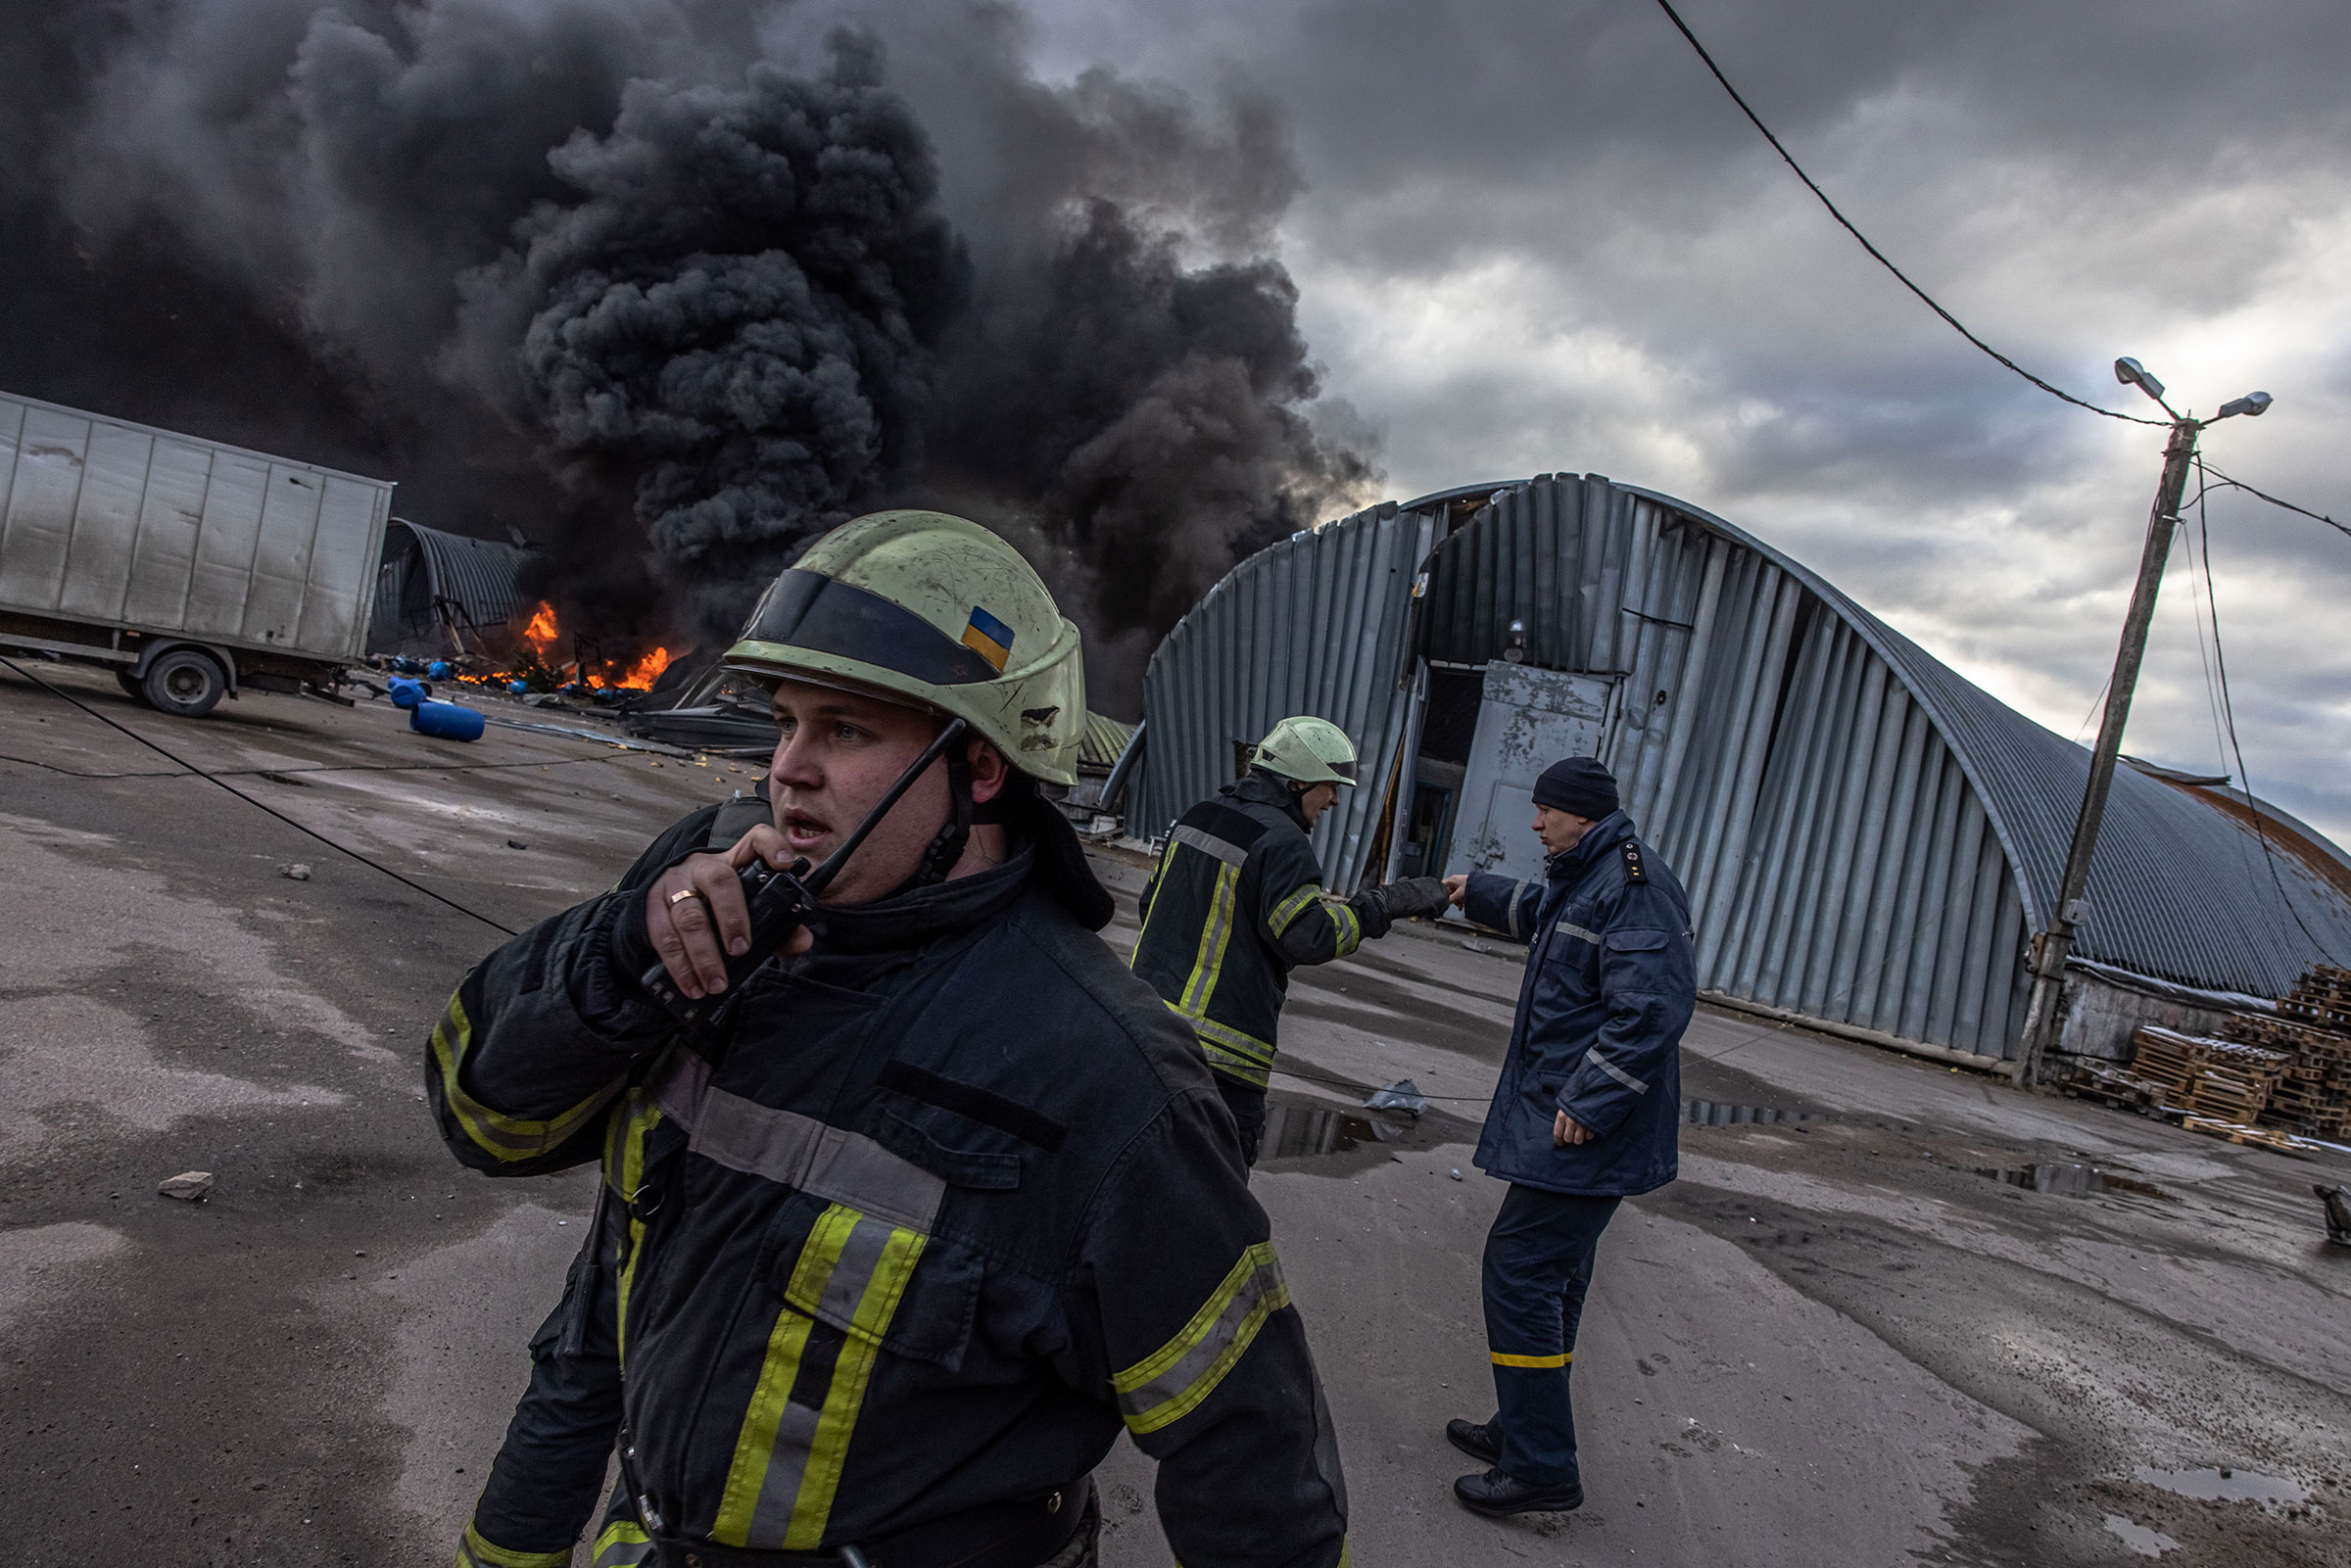 Firefighters try to extinguish a fire at a storage area holding chemicals which was shelled, on the outskirts of Brovary on March 8.